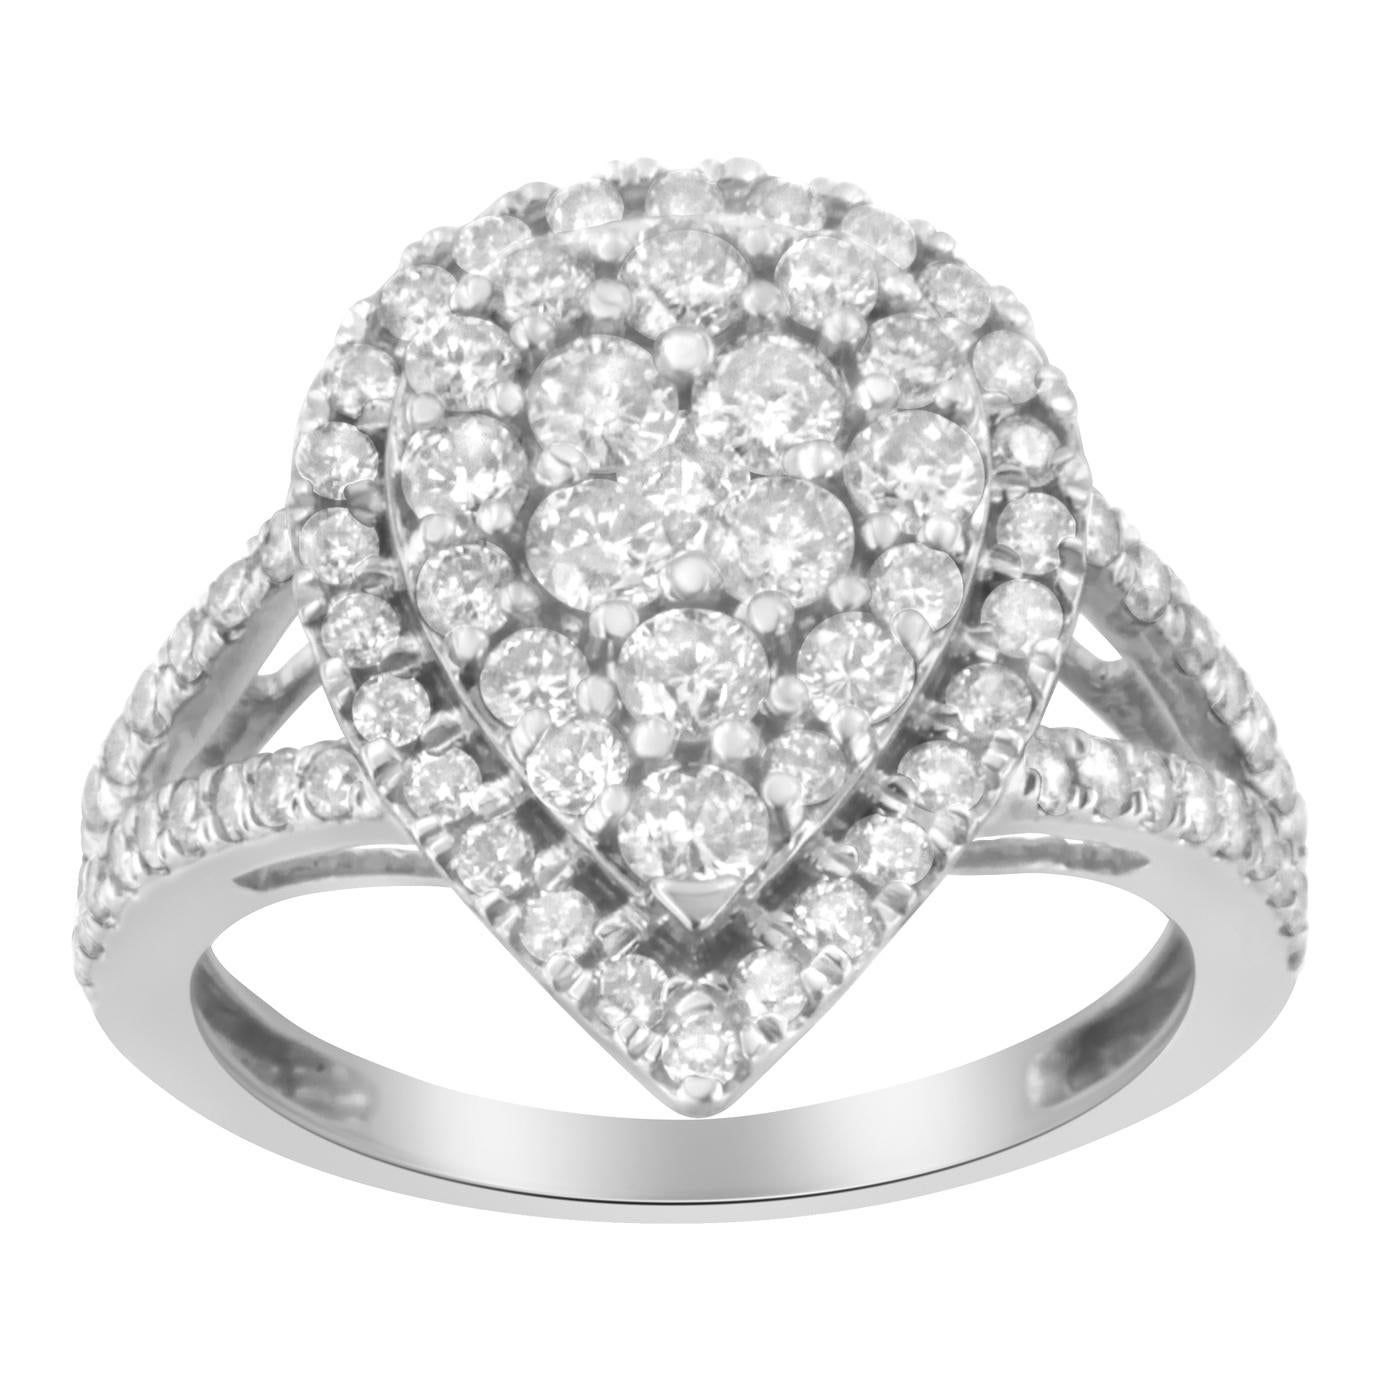 A bold silver and diamond cluster ring. This pear-shaped ring is made with 80 round-cut, natural diamonds in a prong setting, weighing a total of 1 1/2 ct. The diamonds are set in stunning sterling silver.

Product Features: 

Diamond Type: Natural